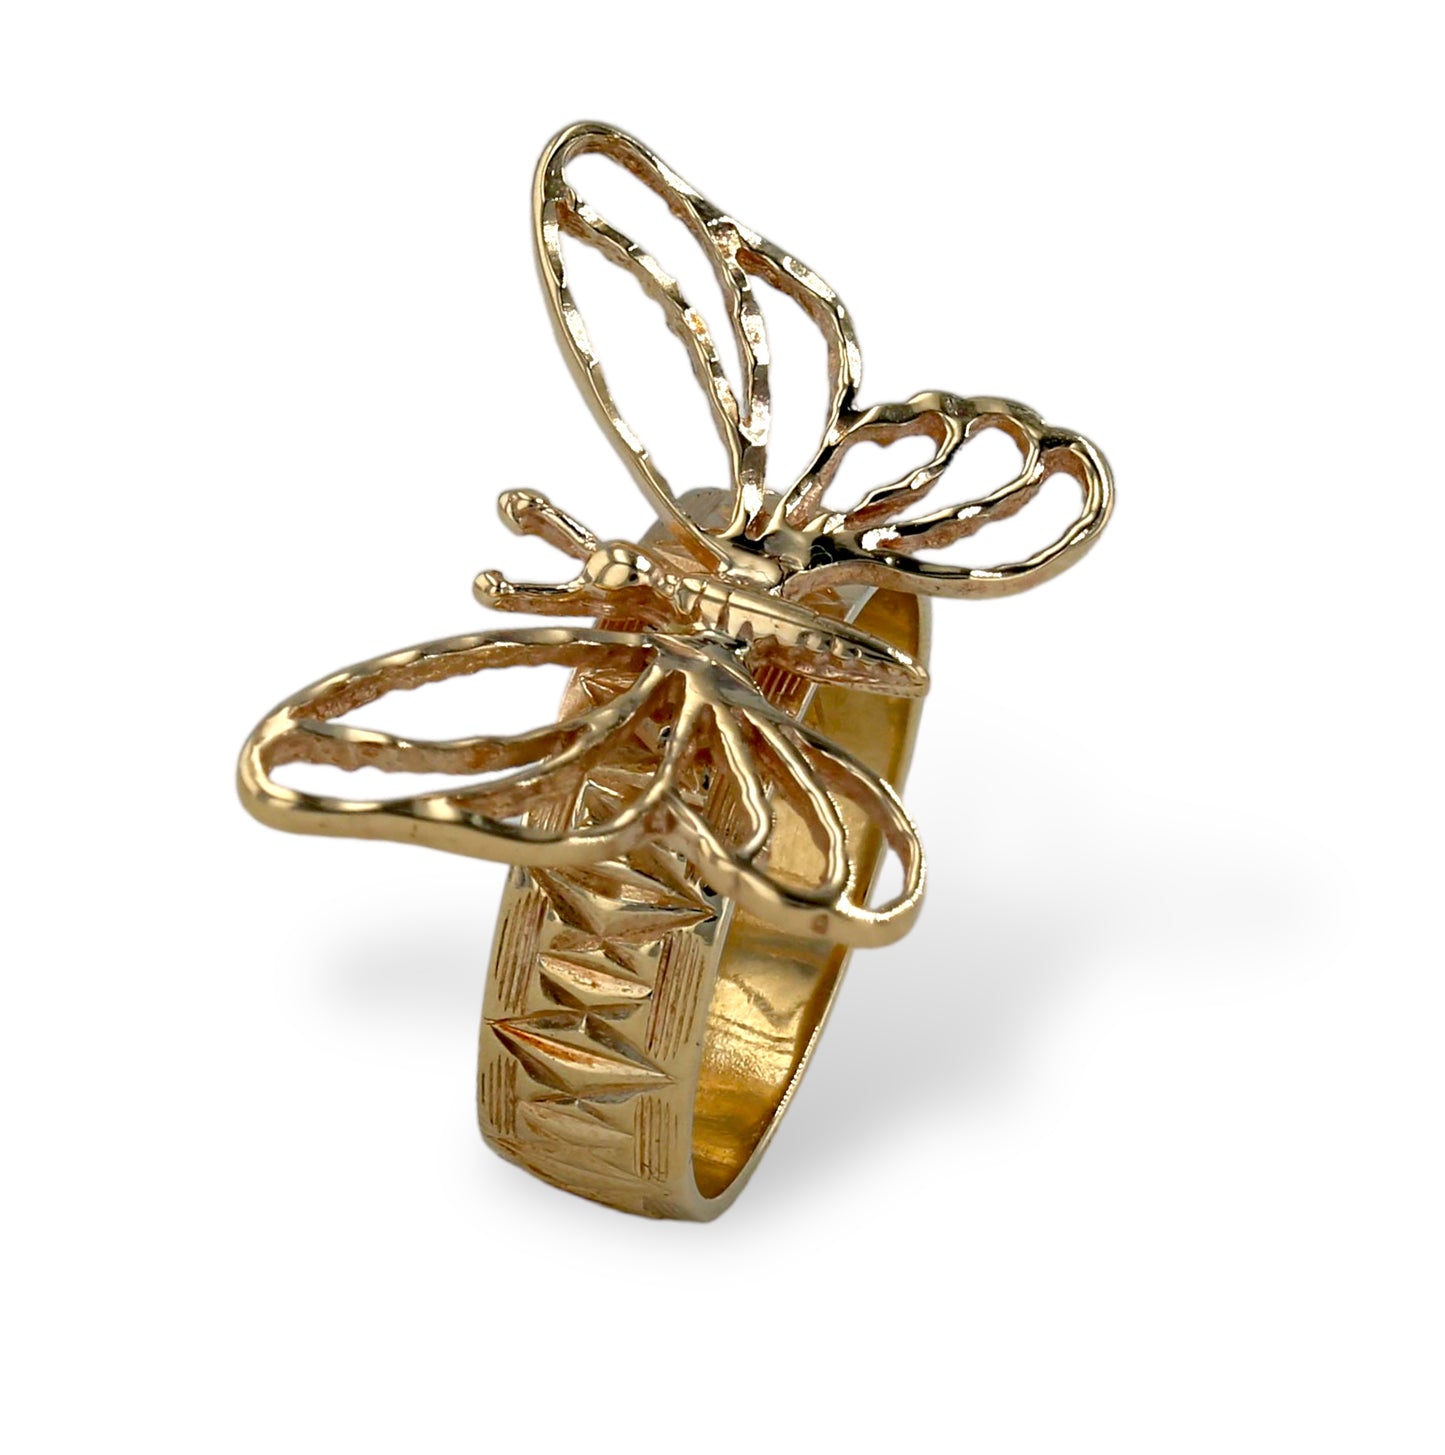 Gold 10k solid vintage butterfly ring